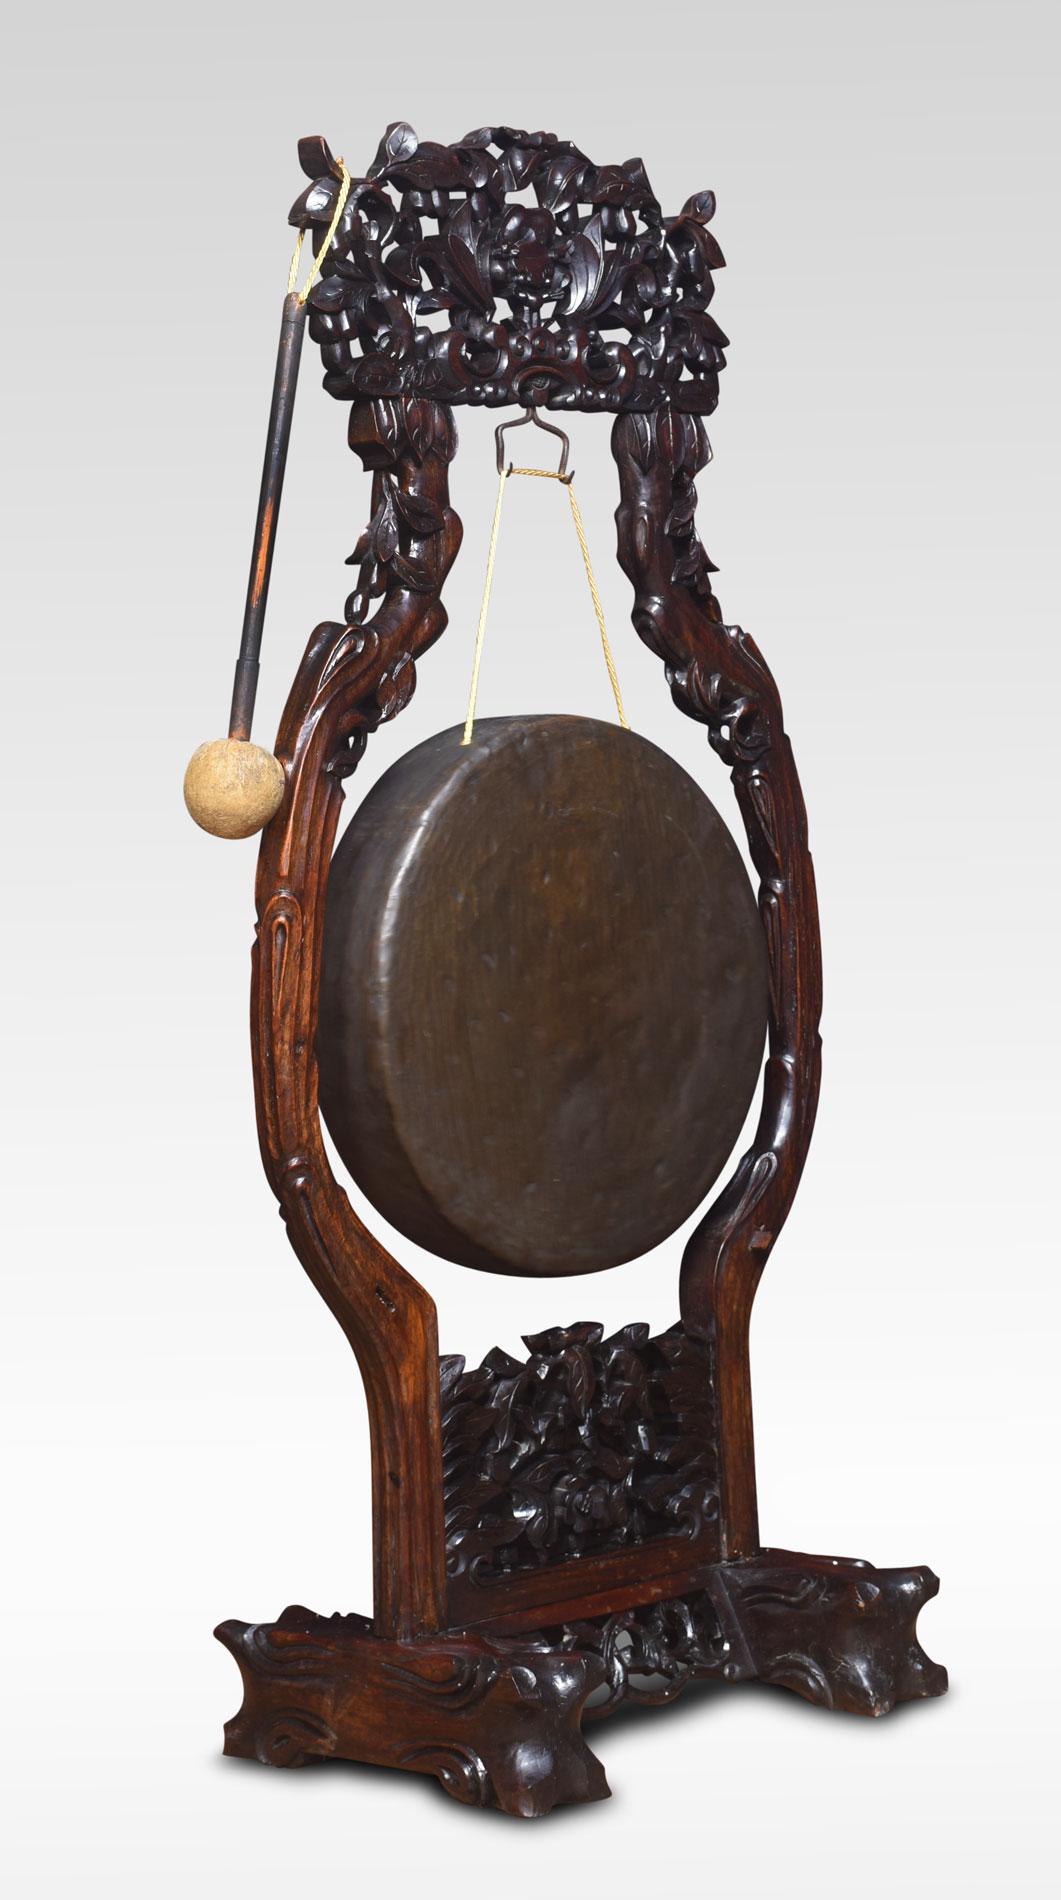 Chinese intricately carved and pierced hardwood dinner gong, having circular brass gong with original beater.
Dimensions
Height 50 inches
Length 24.5 inches
width 13.5 inches.